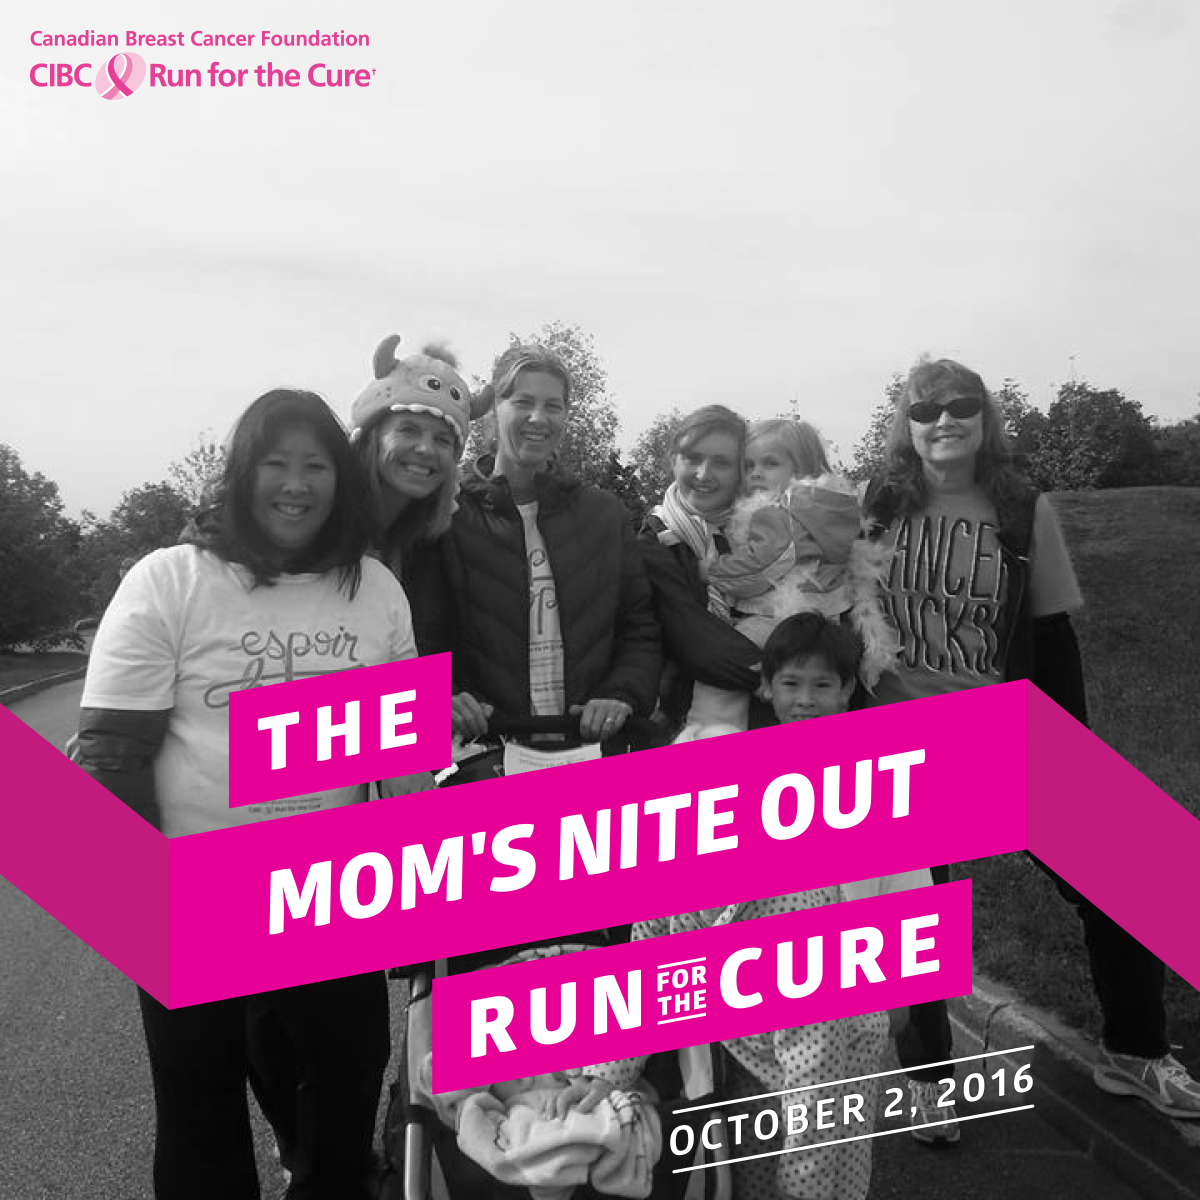 Jeffery Hale's Moms' Nite Out group again for this year's CIBC Run for the Cure